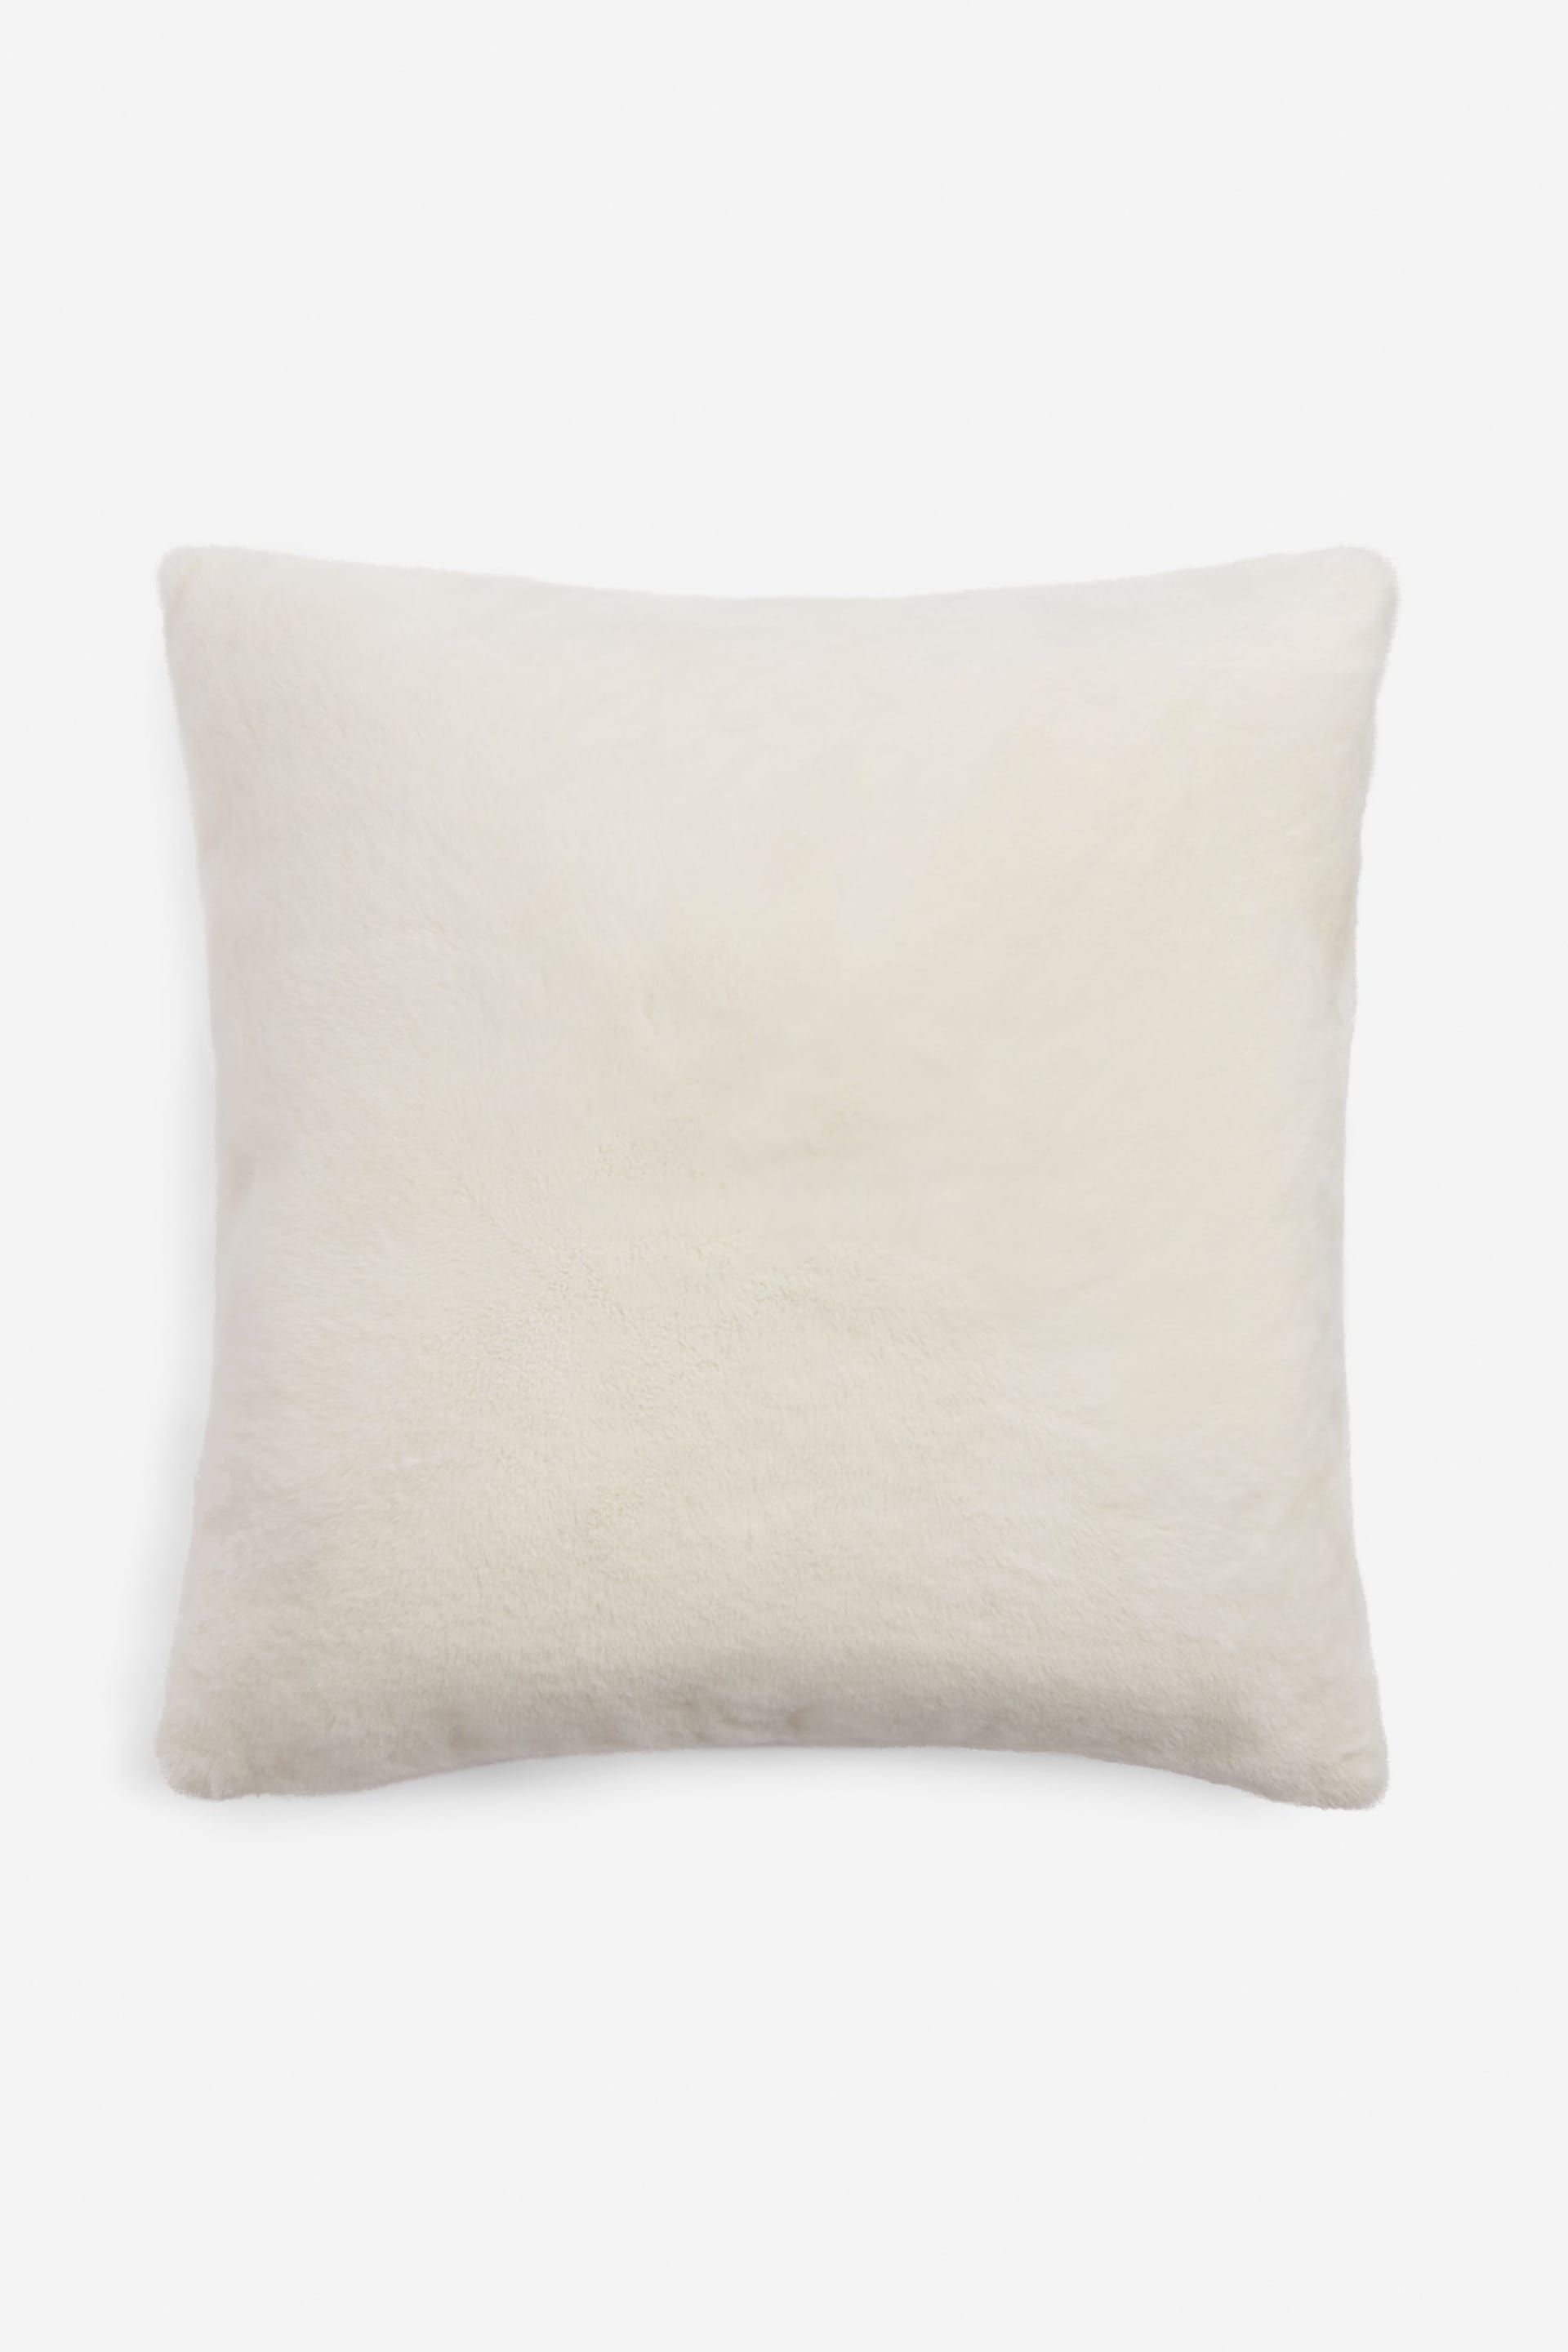 Ivory Soft To Touch Plush 59 x 59cm Faux Fur Cushion - Image 2 of 3